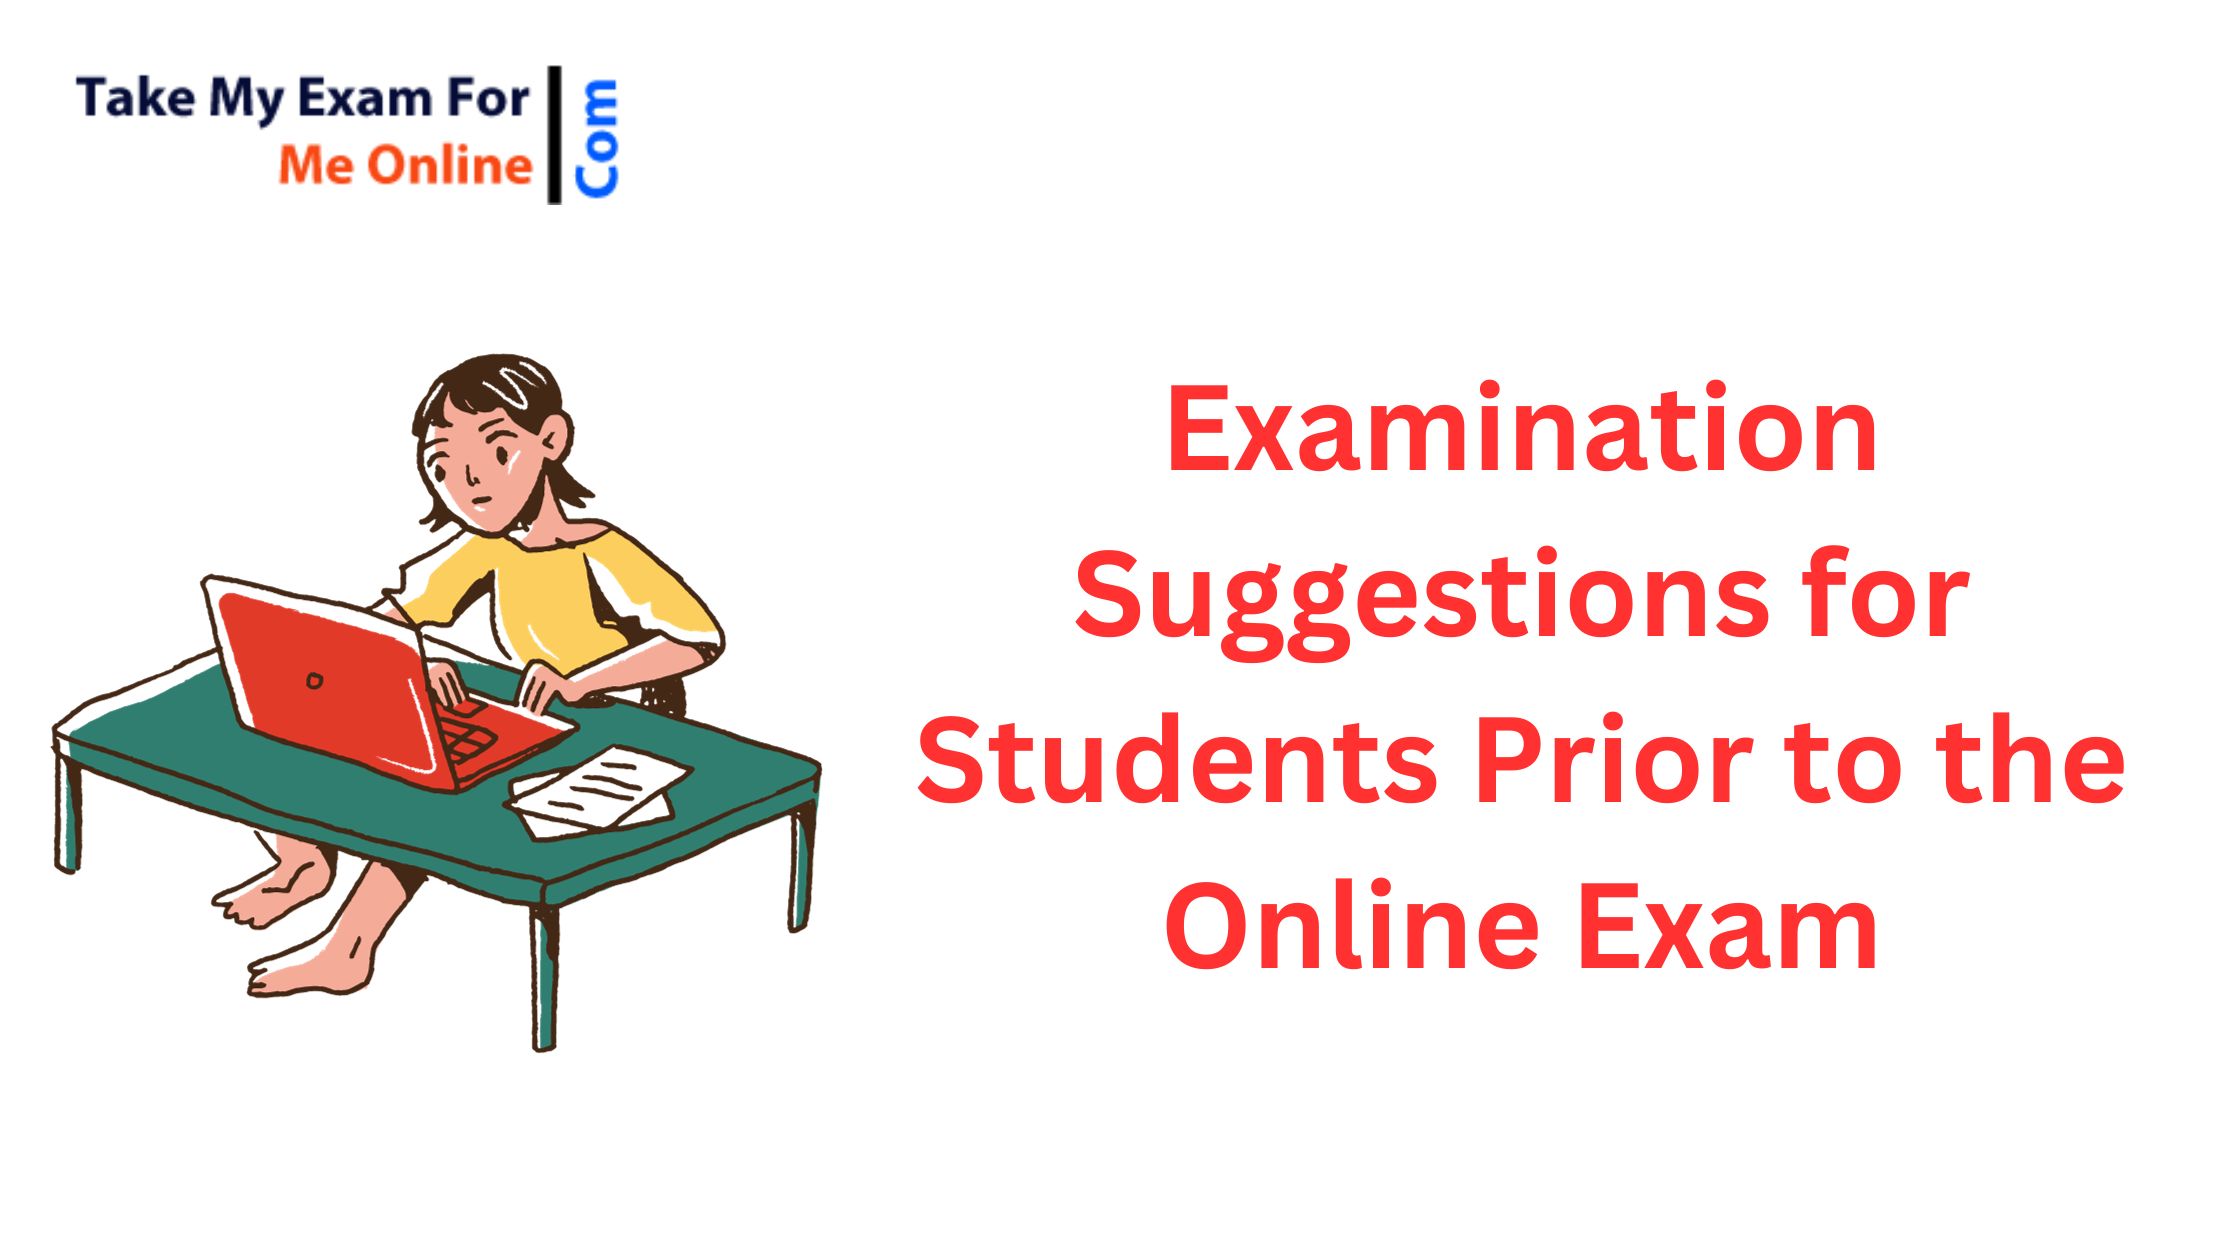 Examination Suggestions for Students Prior to the Online Exam